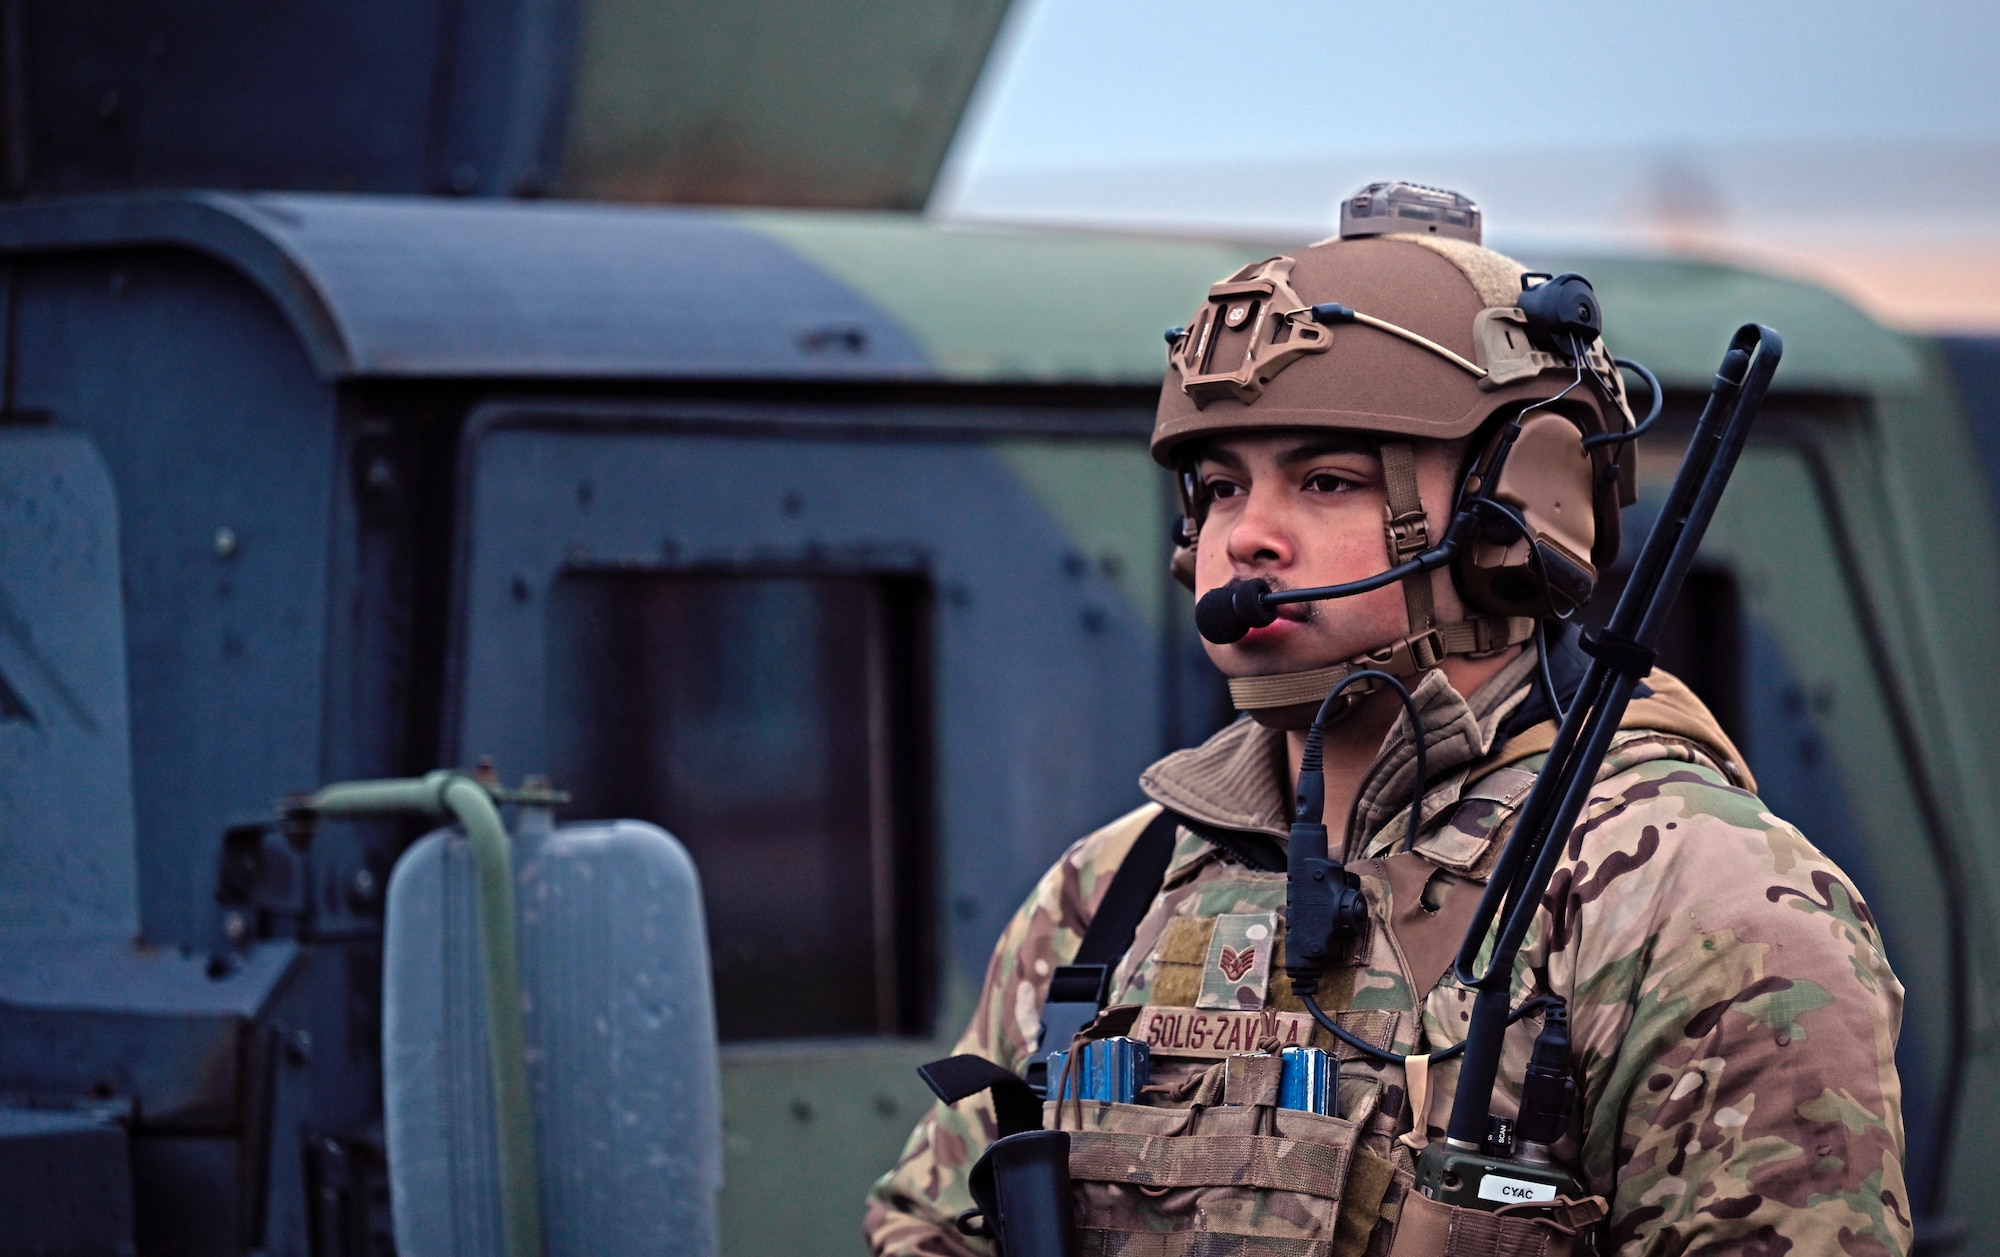 U.S. Air Force Staff Sgt. Jesus Solis-Zavala, 435th Security Forces Squadron contingency response team member, provides security during Exercise Agile Bison 23-1 at Chièvres Air Base, Belgium, March 7, 2023. As the sole unit in U.S. Air Forces in Europe and Air Forces Africa that provides expeditionary airfields on demand, the 435th Contingency Response Group utilizes and deploys small specialized teams throughout both continents to successfully implement their mission.